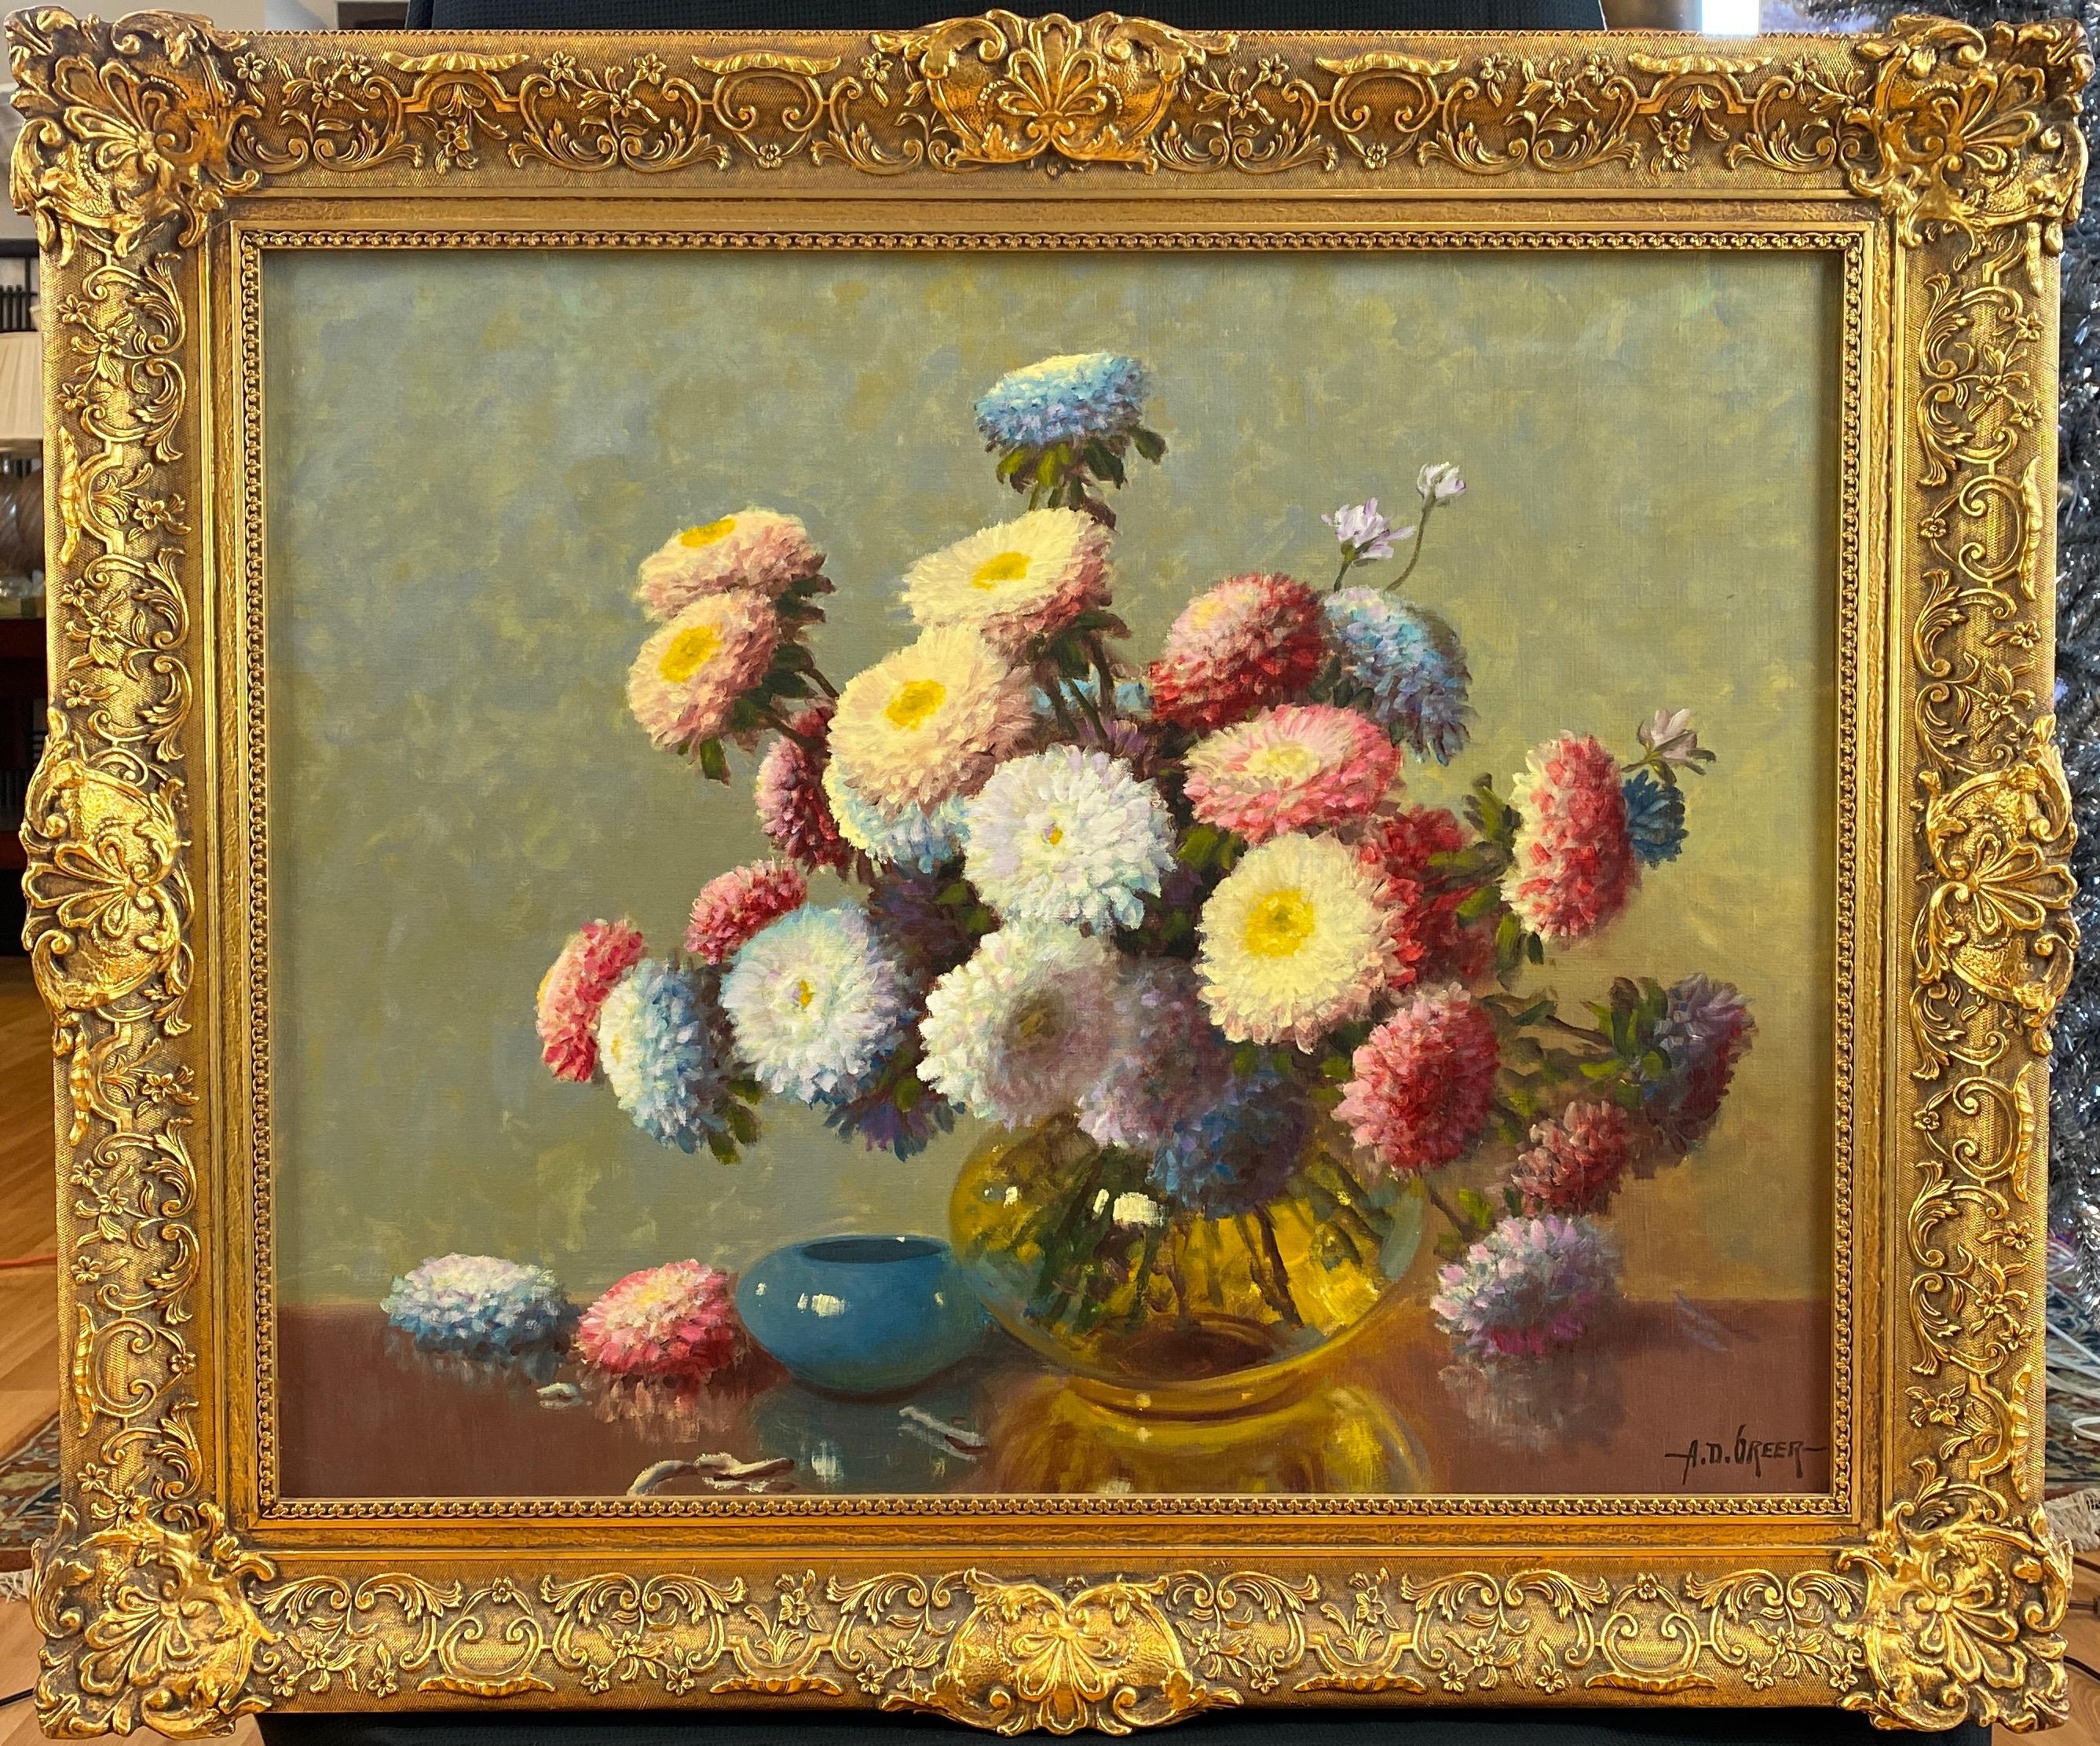 A large and lovely 1940s floral still life oil painting on canvas titled 